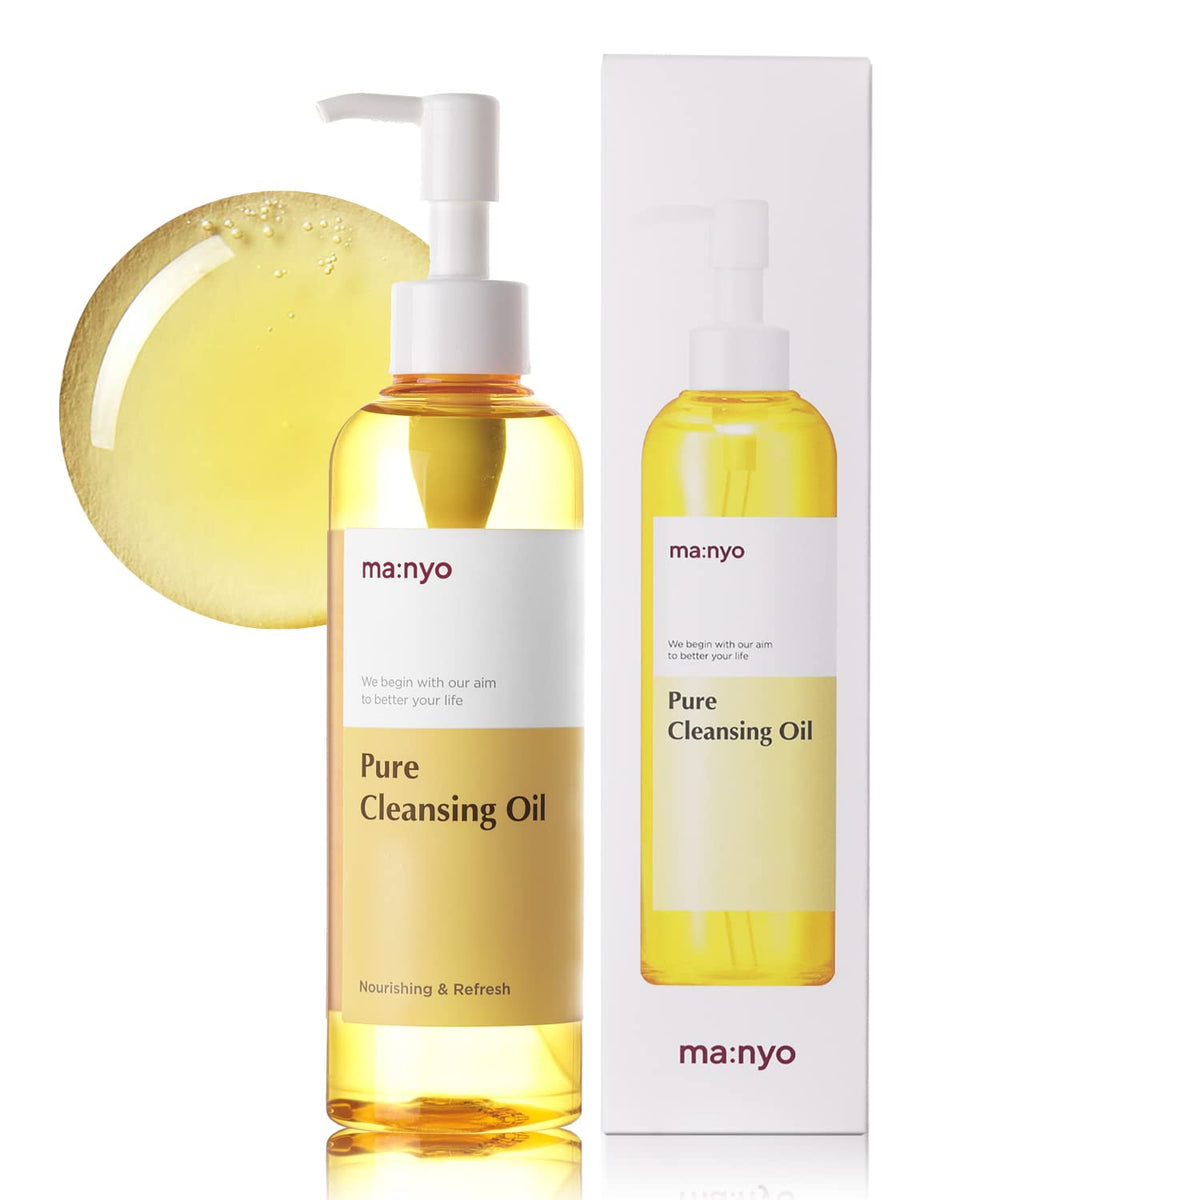 [ MA:NYO FACTORY ] Pure Cleansing Oil, 200ml / 6.7 fl oz